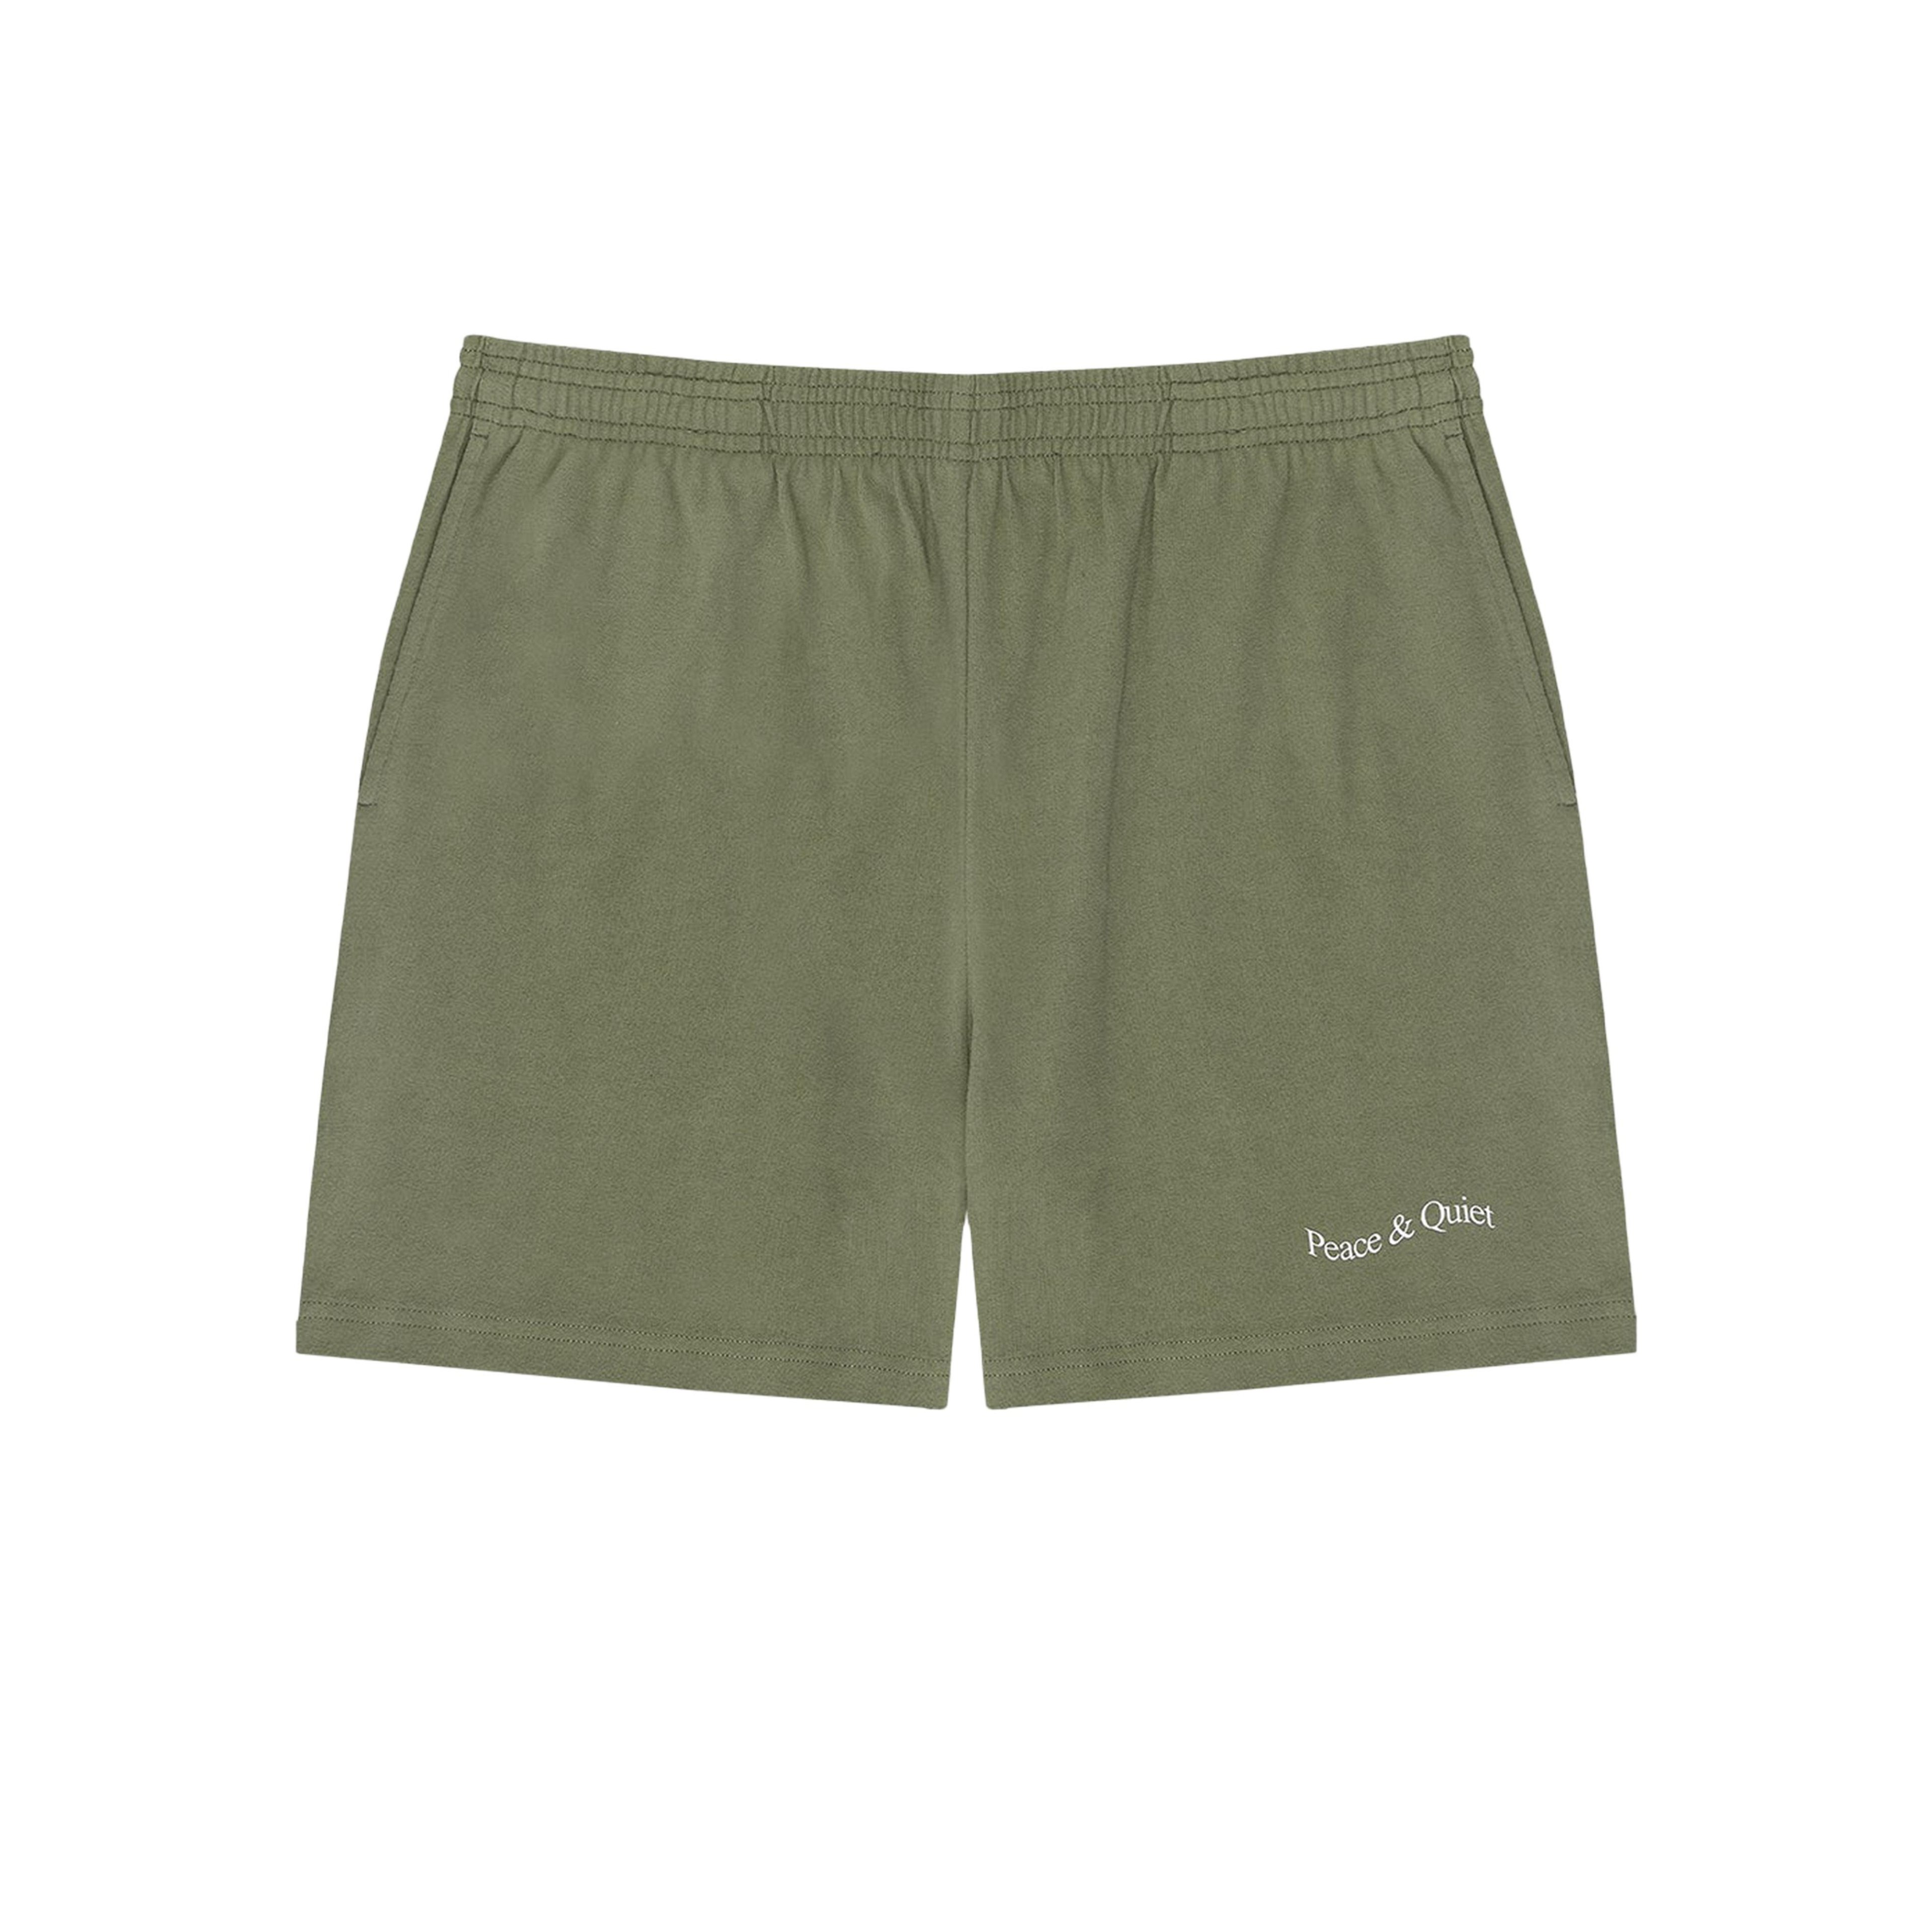 MUSEUM OF PEACE AND QUIET - Wordmark Sweatshorts - (Olive) by MUSEUM OF PEACE&QUIET